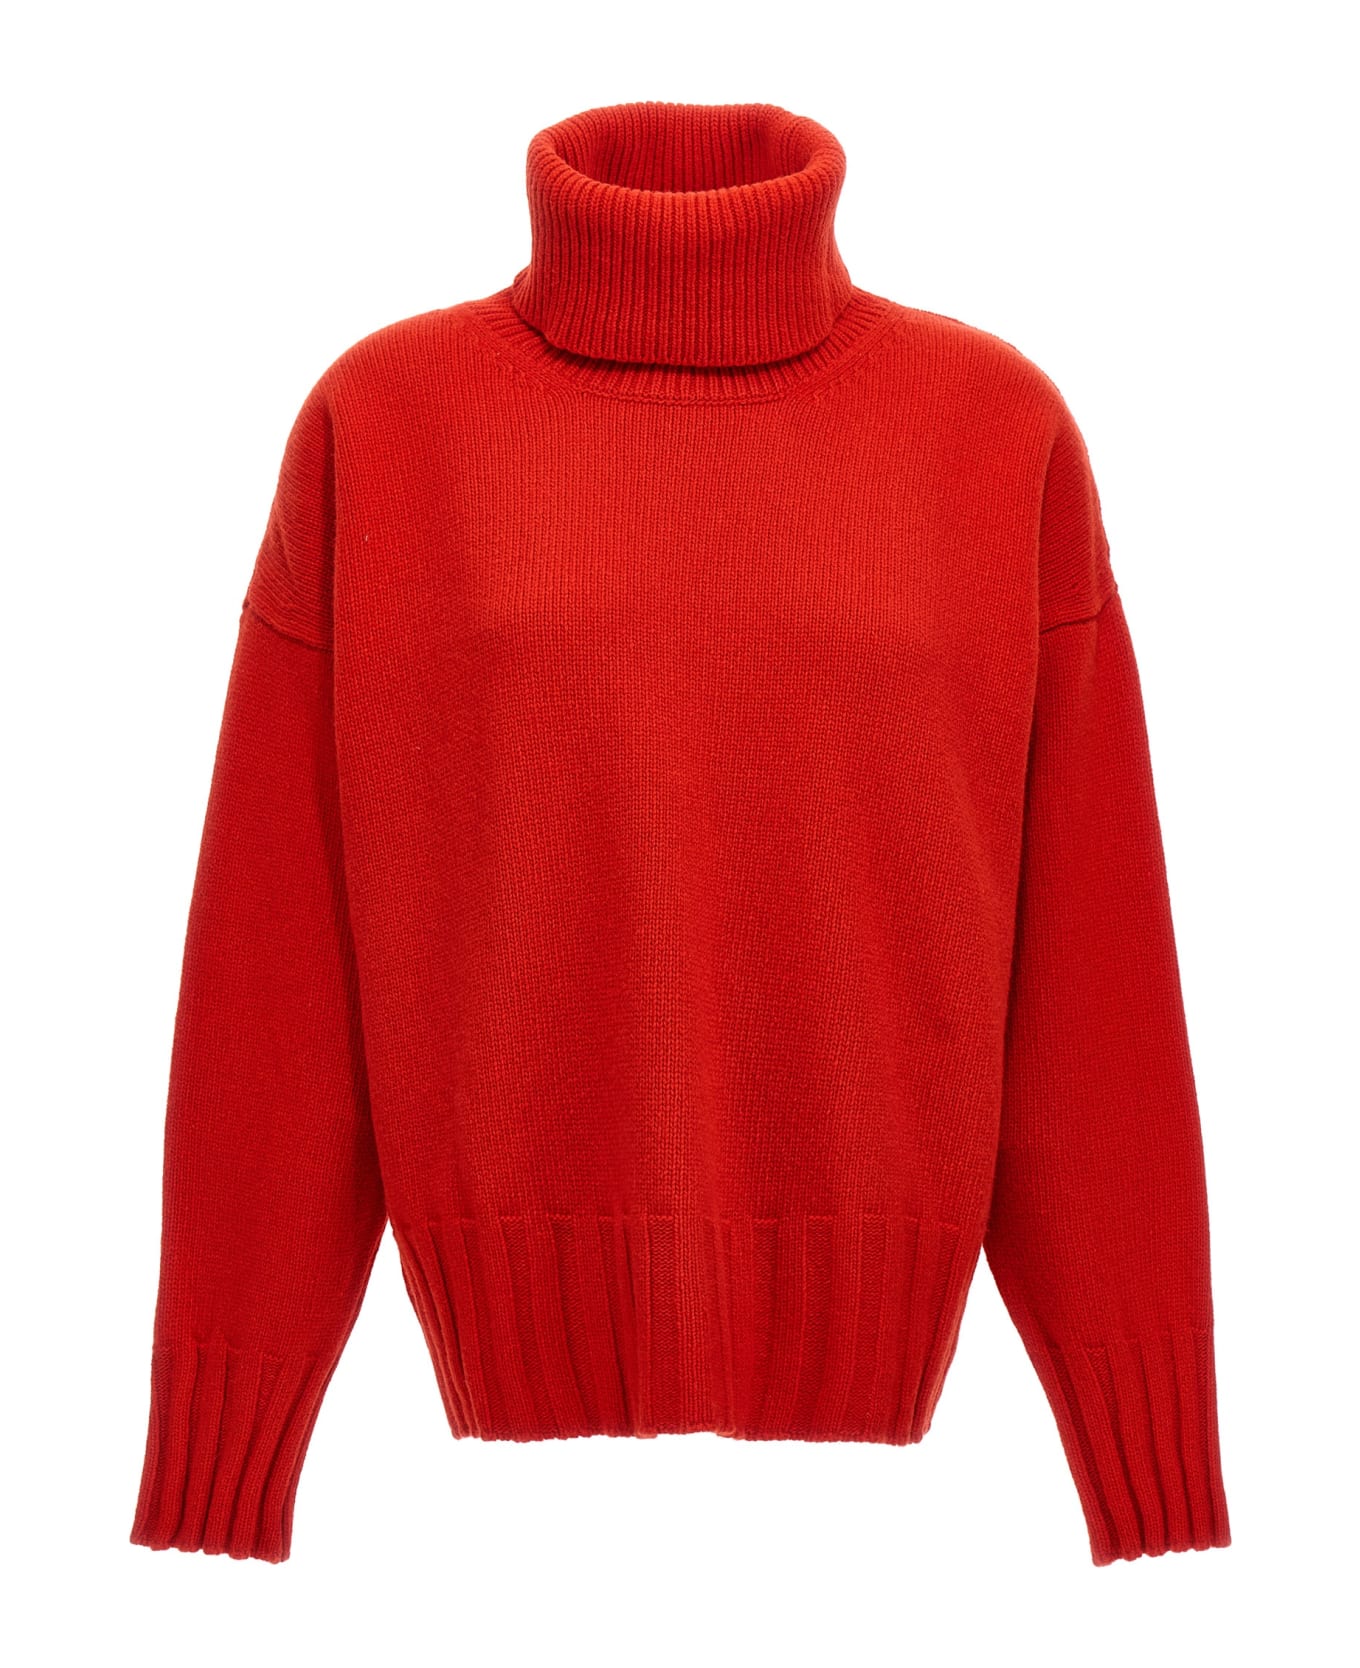 Made in Tomboy 'ely' Sweater - Red